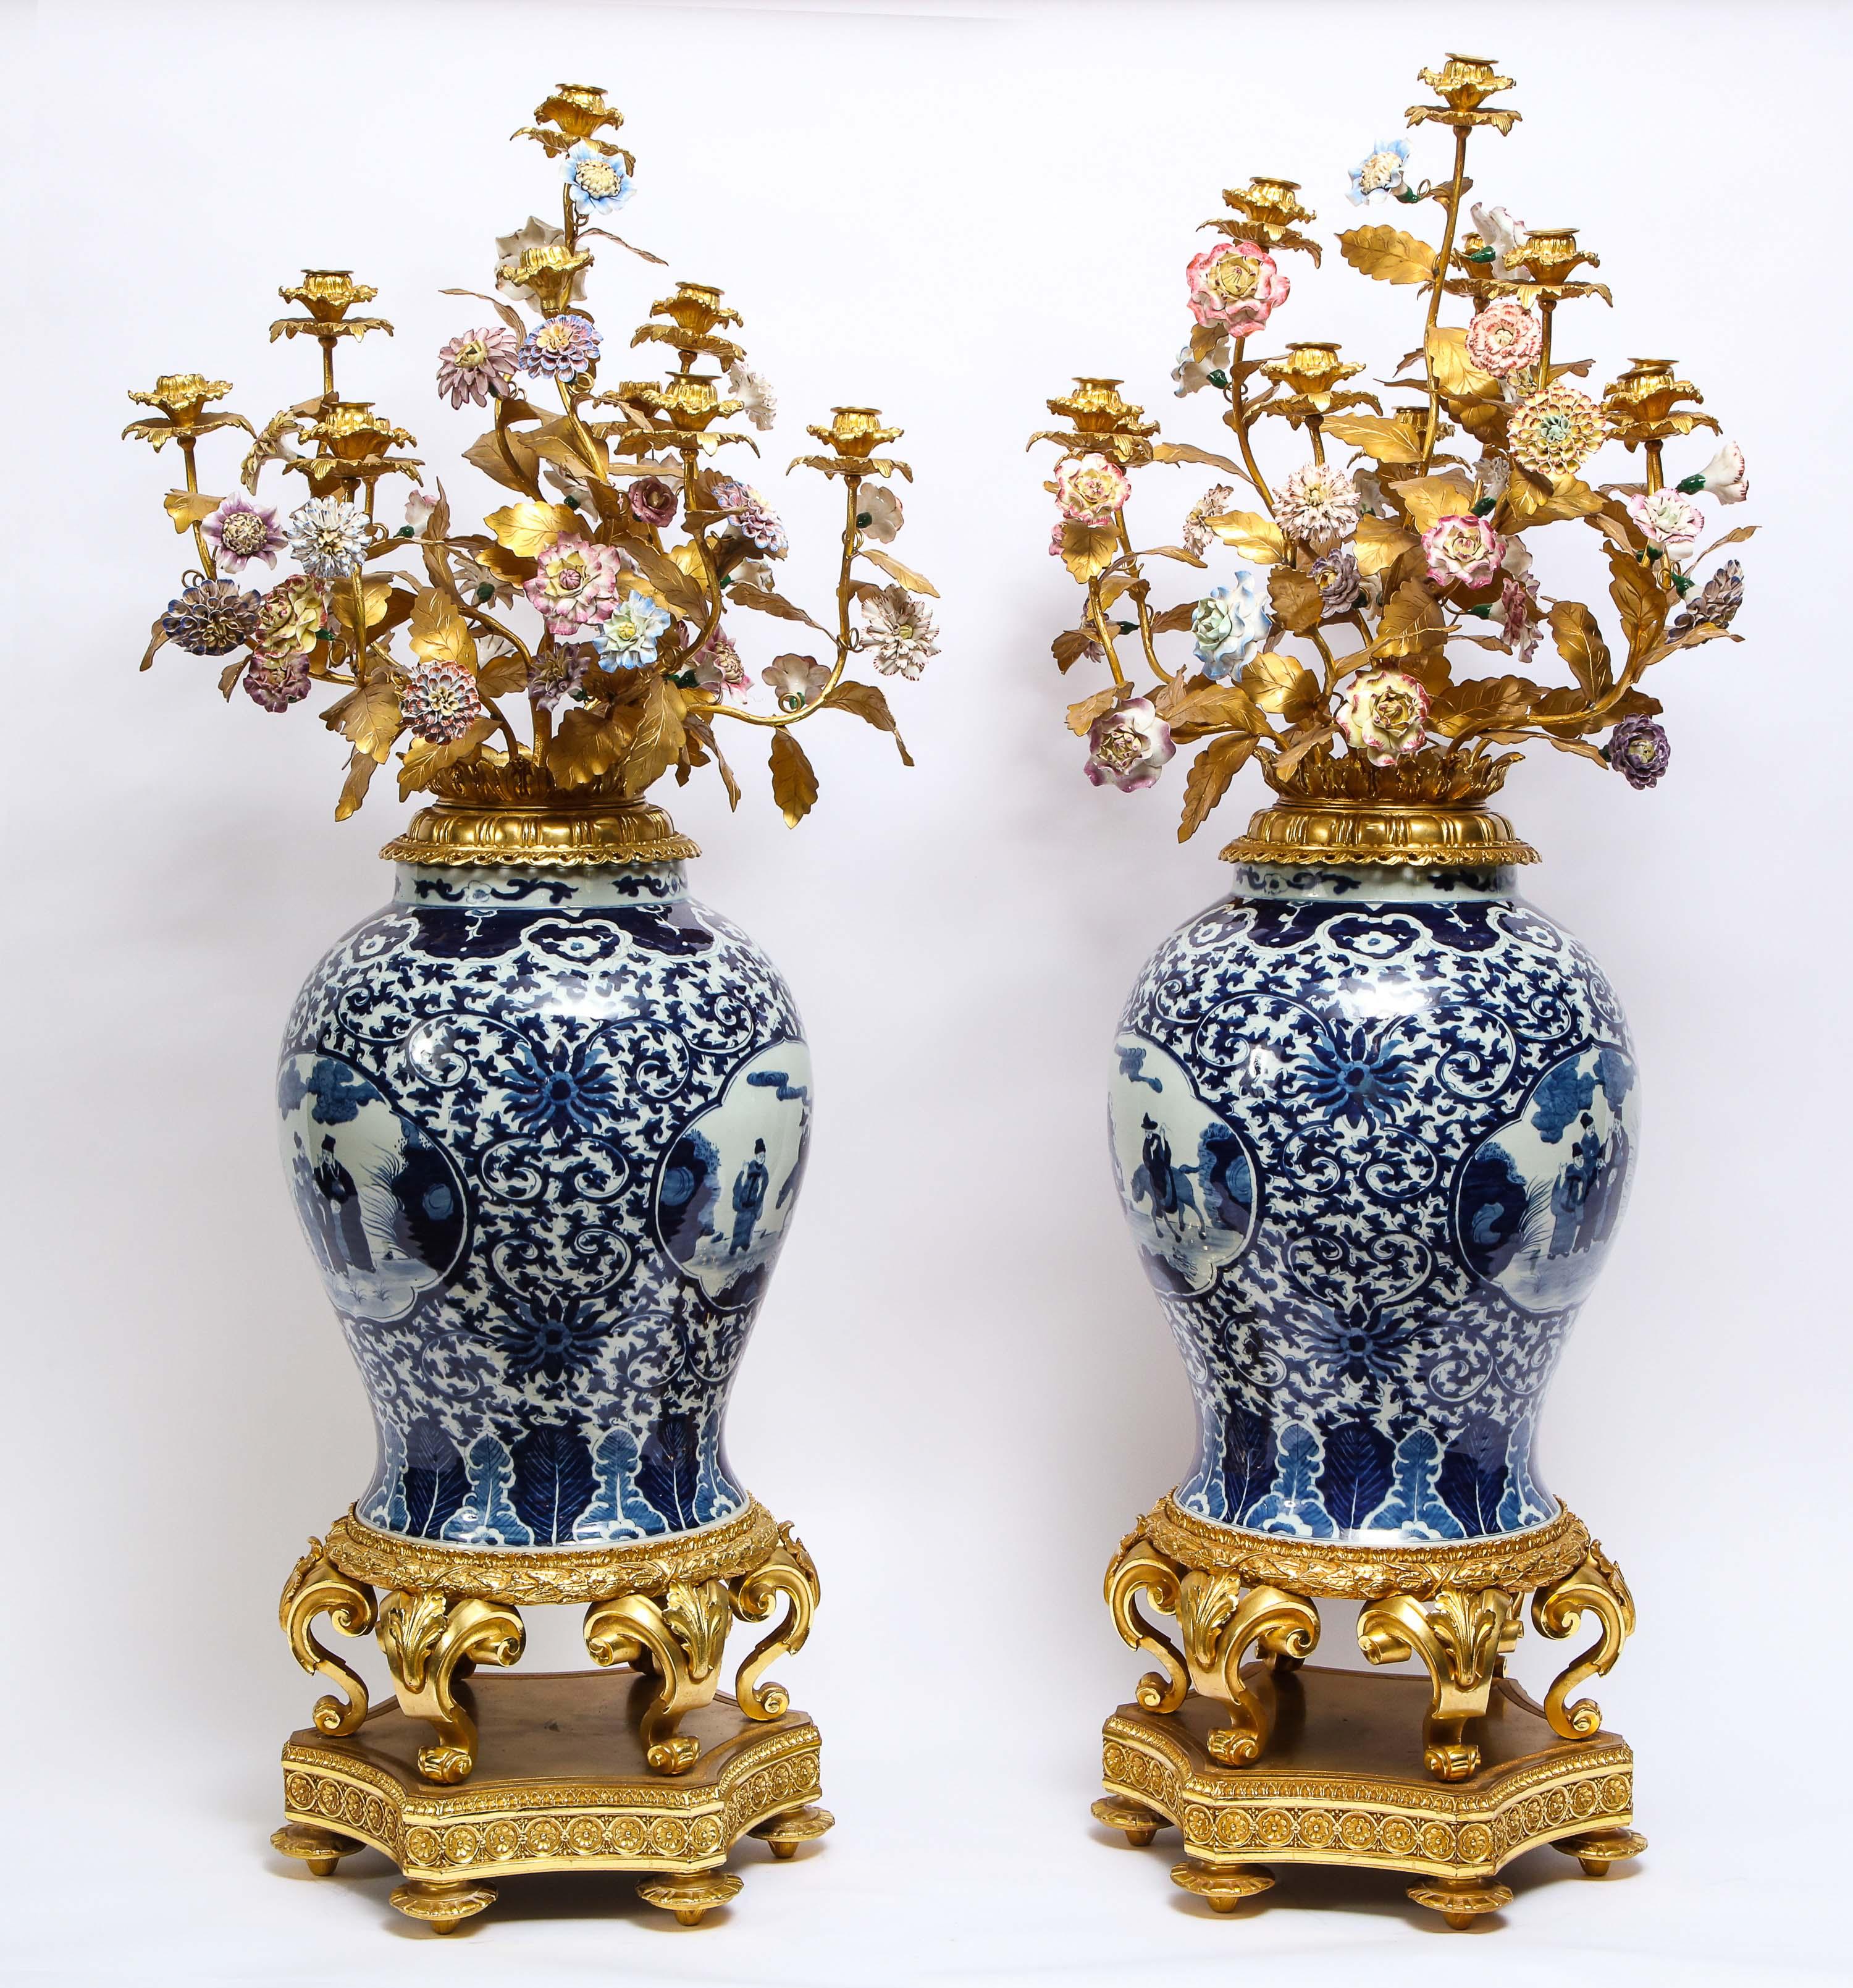 A monumental pair of Chinoiserie style French Ormolu mounted Chinese blue and white porcelain ten arm candelabras. These are truly a beautiful and monumental pair of candelabras. The body is a beautiful blue and white porcelain made in China with